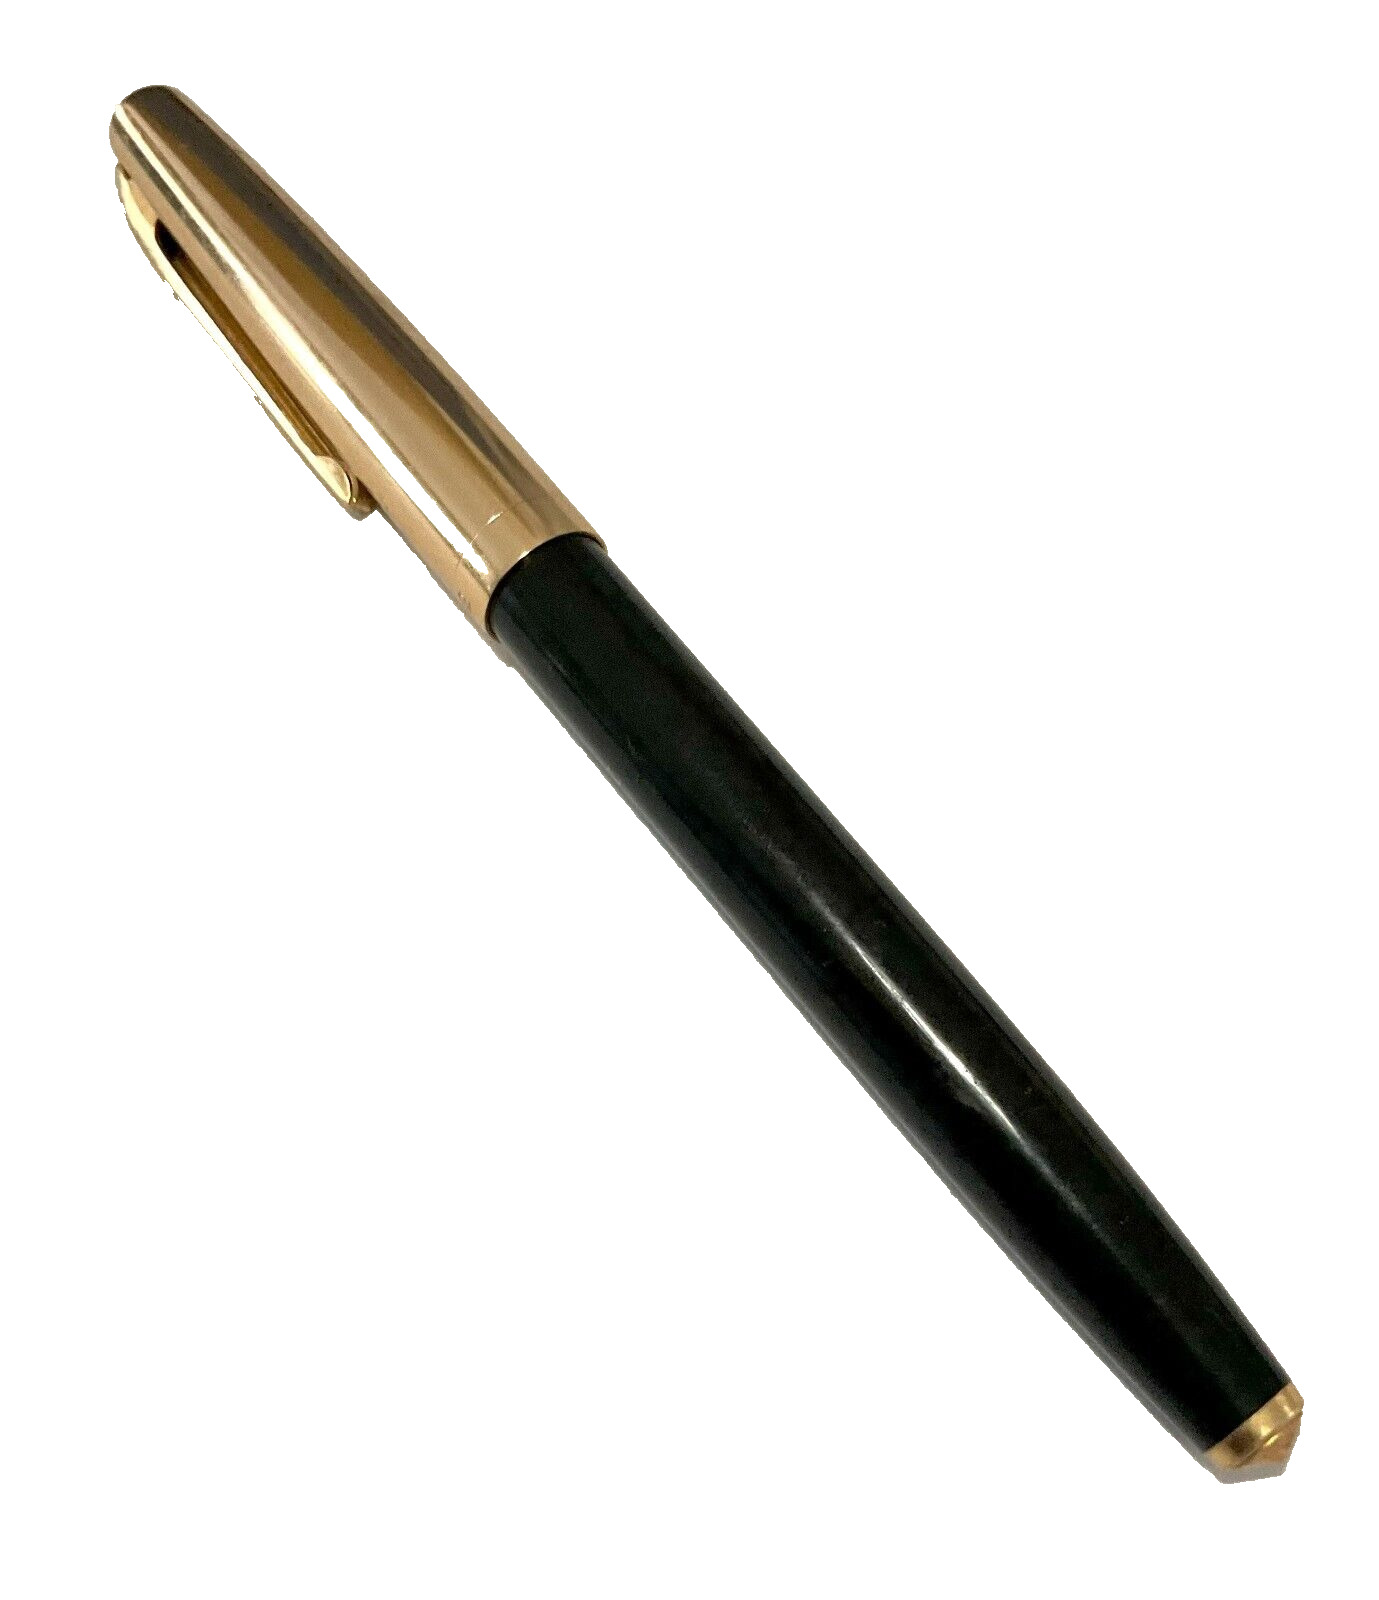 Pen - Black and Goldtone, Brand Unknown, Model 712,  Needs Ink